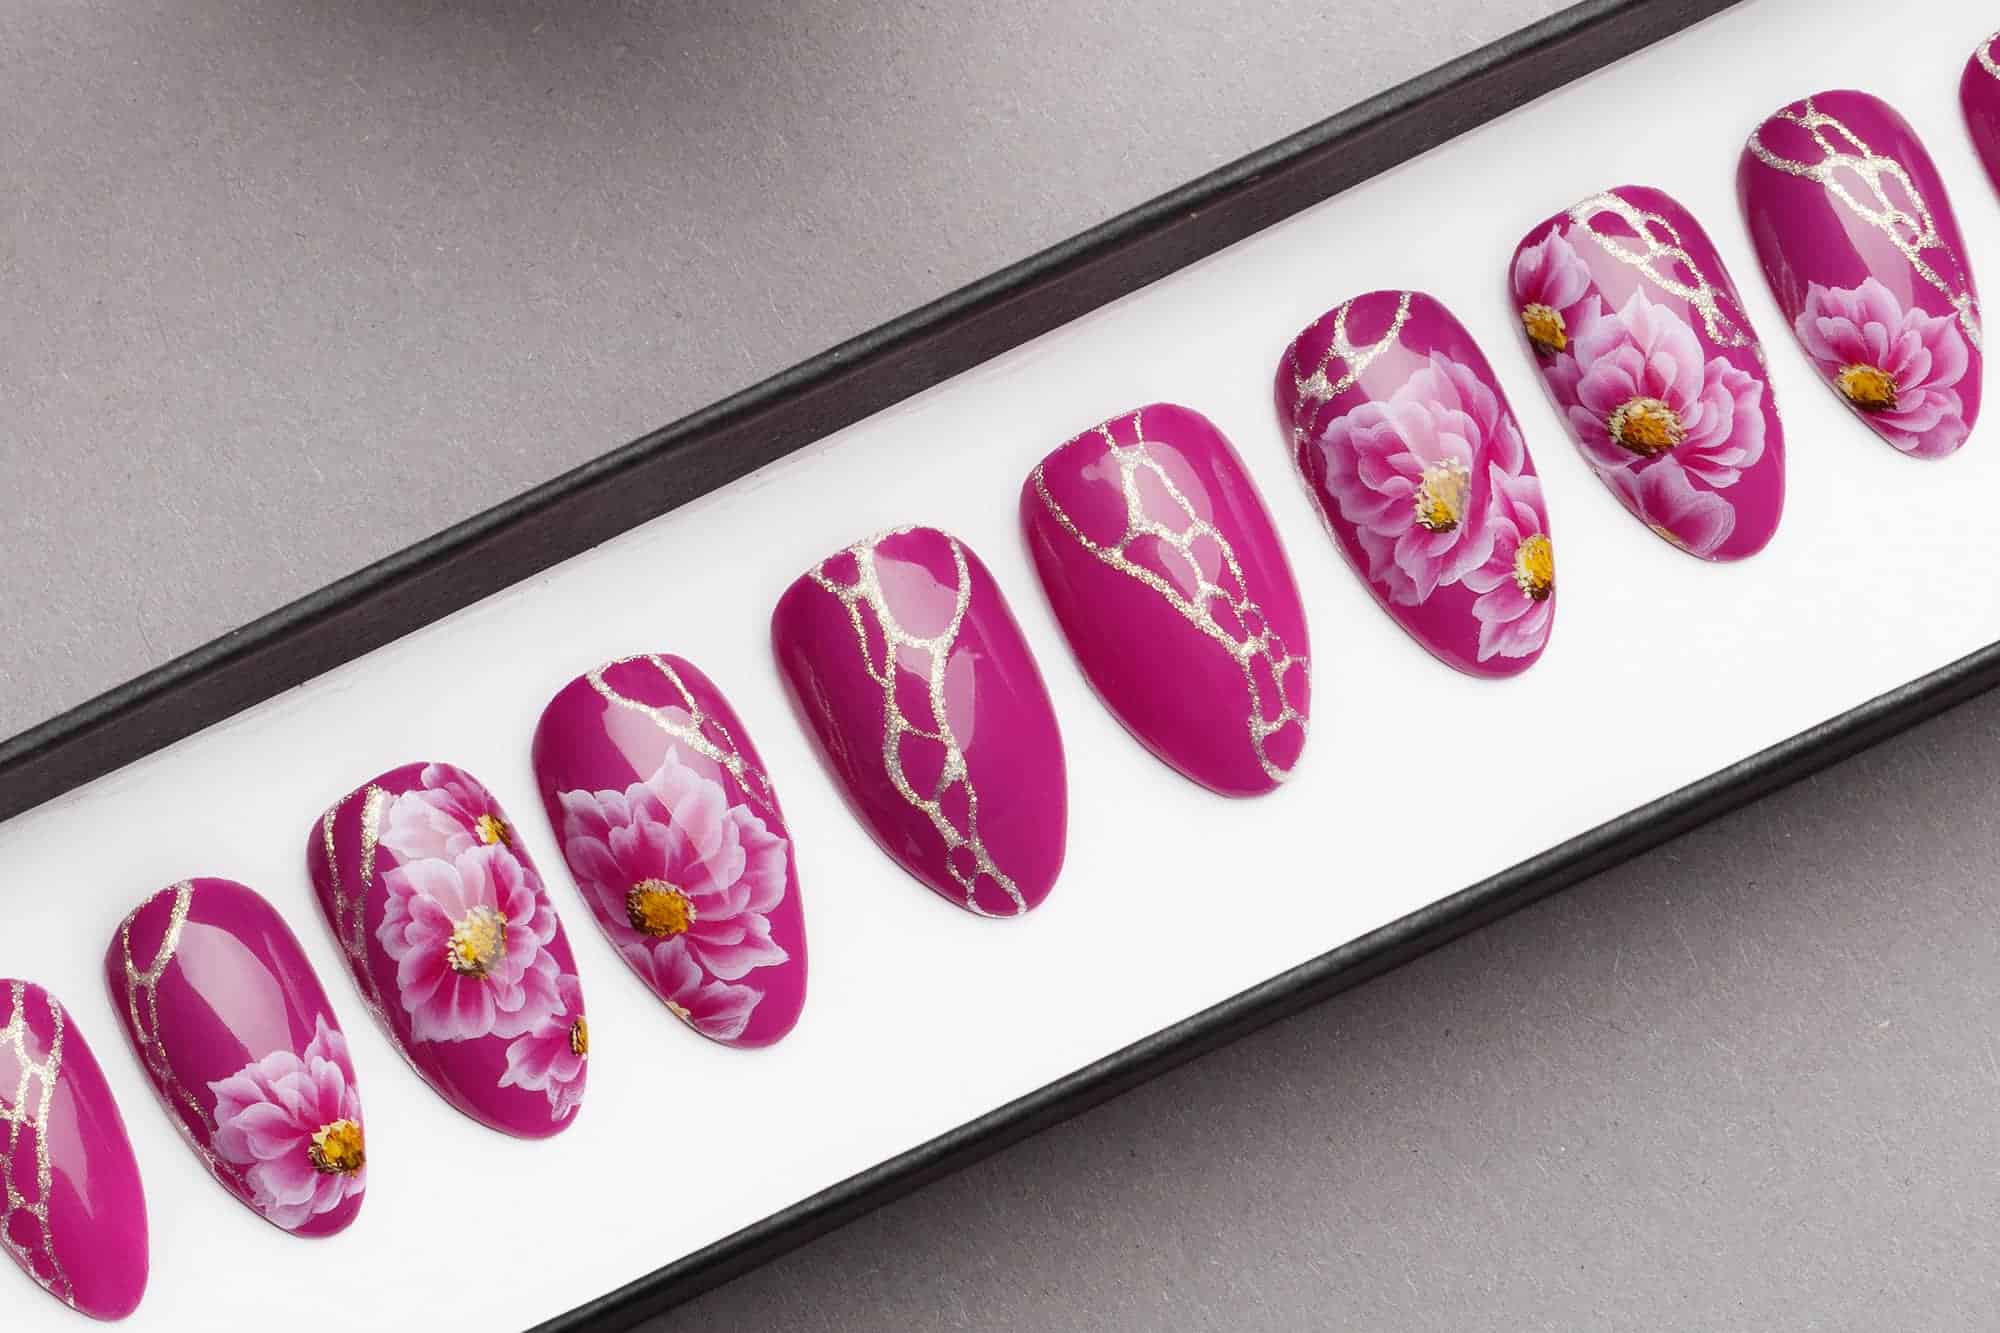 Crimson Press on Nails with One Stroke Flowers | GoldenTracery | Hand painted Nail Art | Fake Nails | False Nails | Celebrity Nails